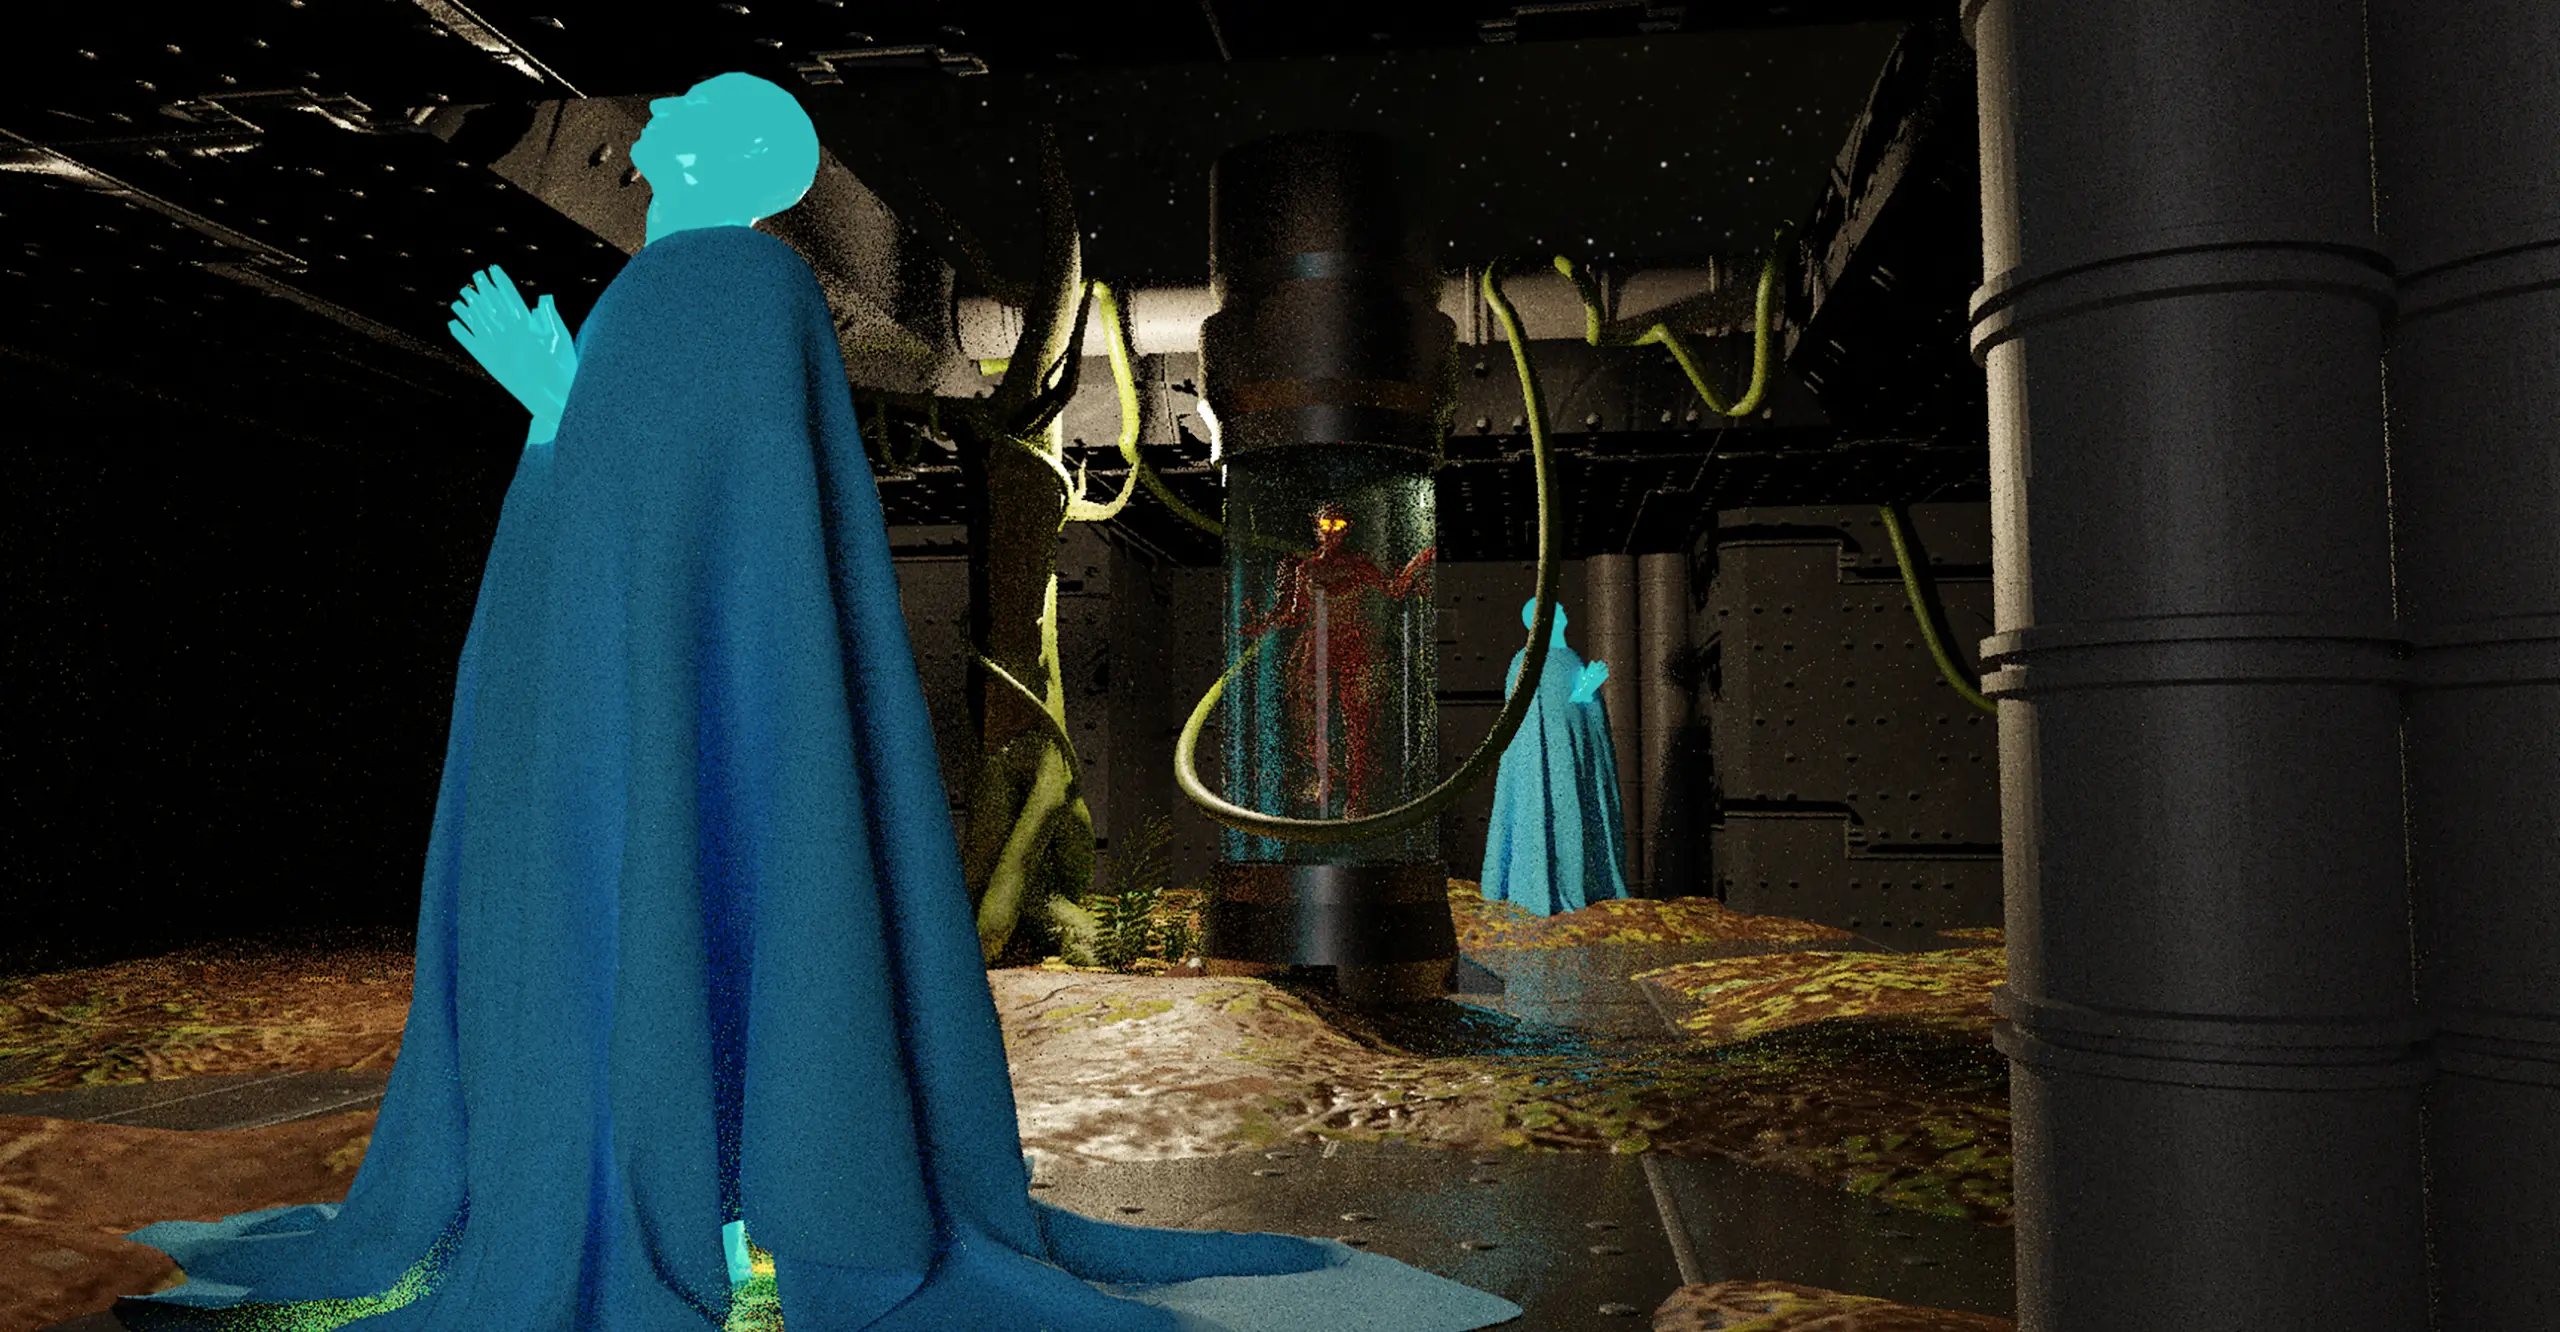 A blue digital figure in a darker blue cloak looks upwards in prayer, in an industrial indoor environment that includes a human-like figure in a floating vertically in a tube